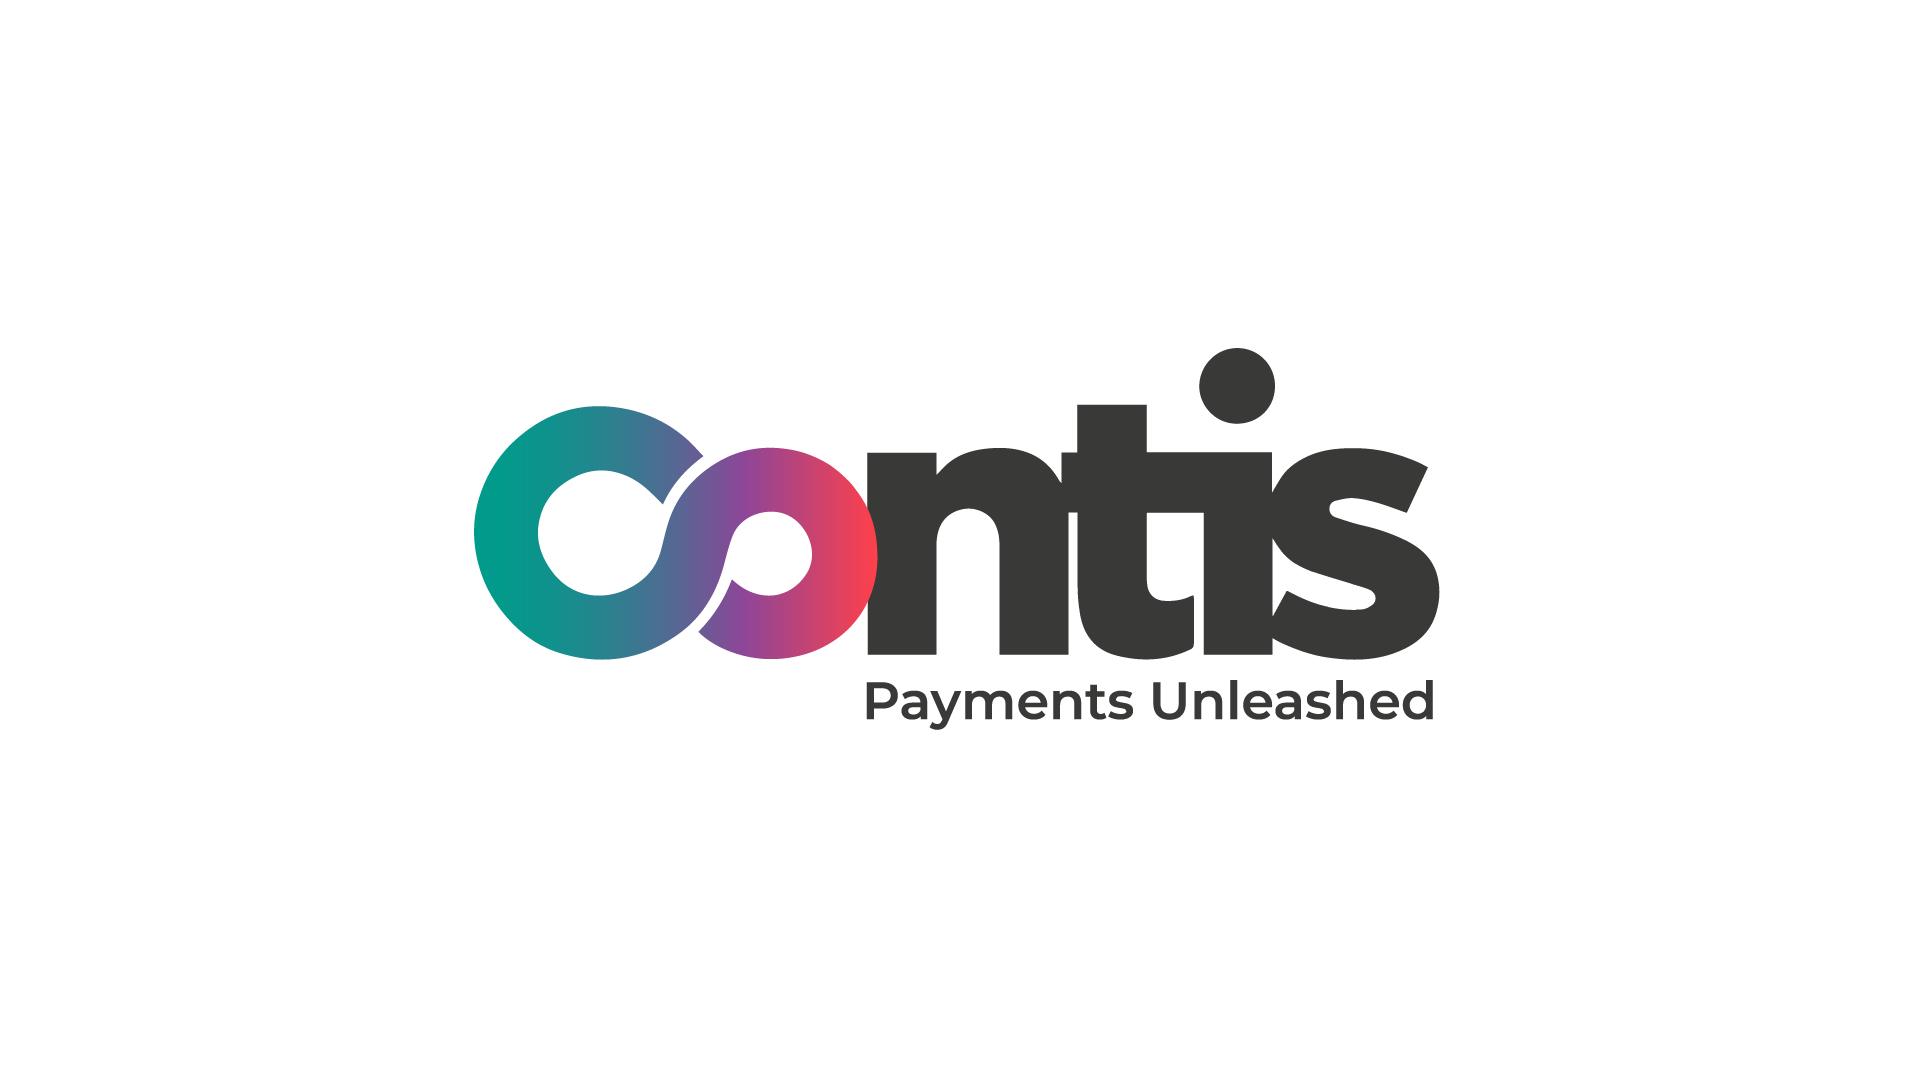 Contis Launches New Processing Solution to Boost European Expansion